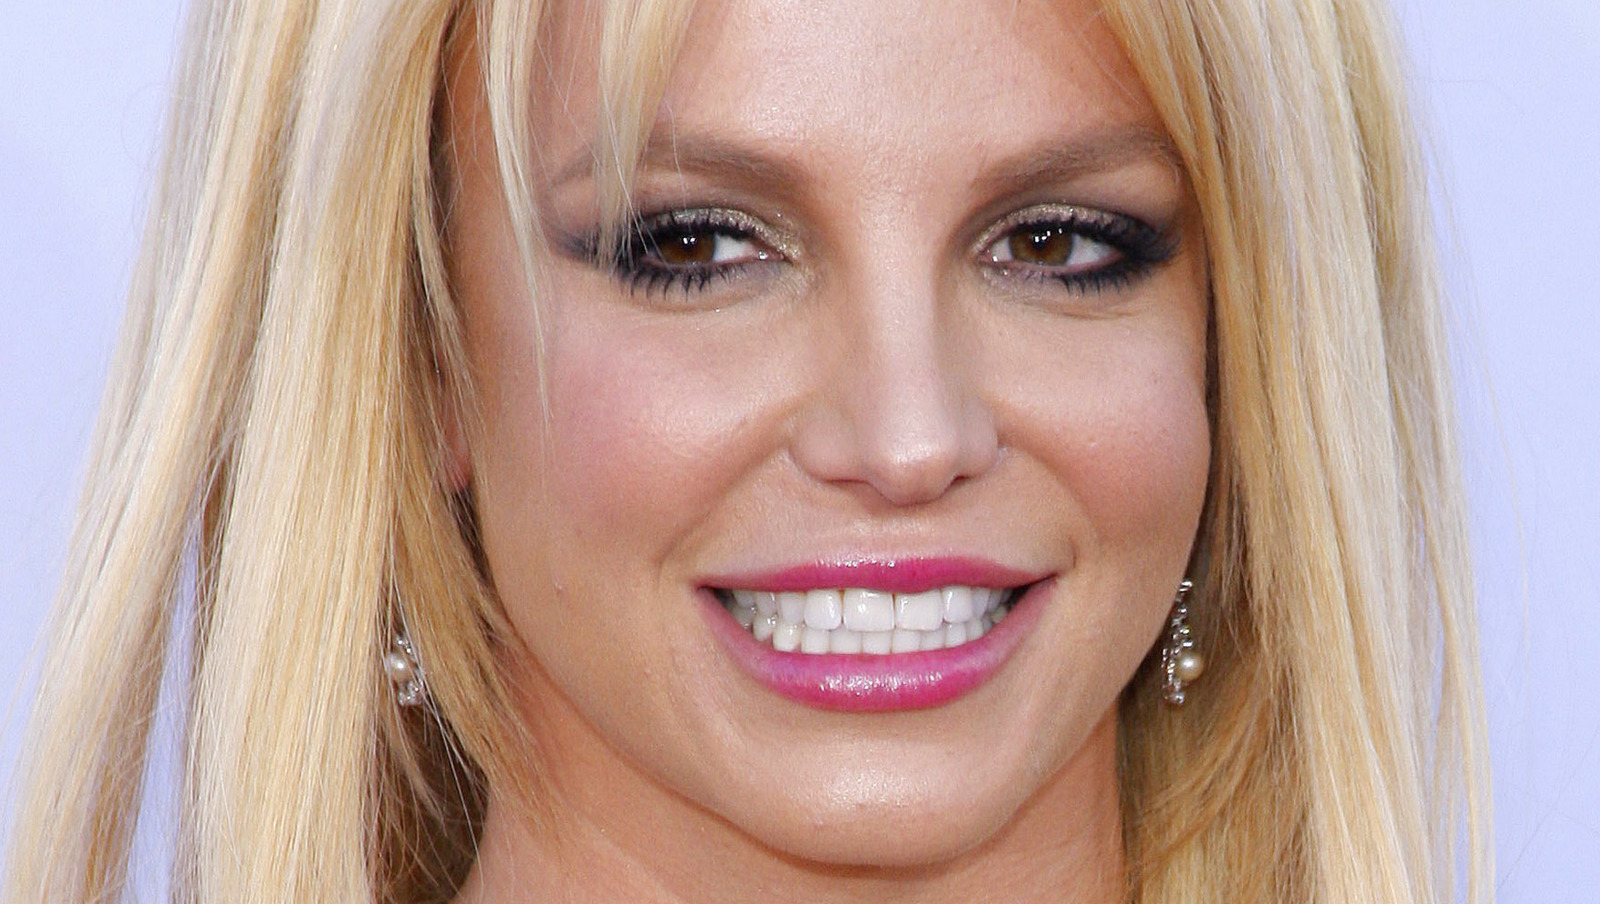 The Number Ones: Britney Spears' “Womanizer”